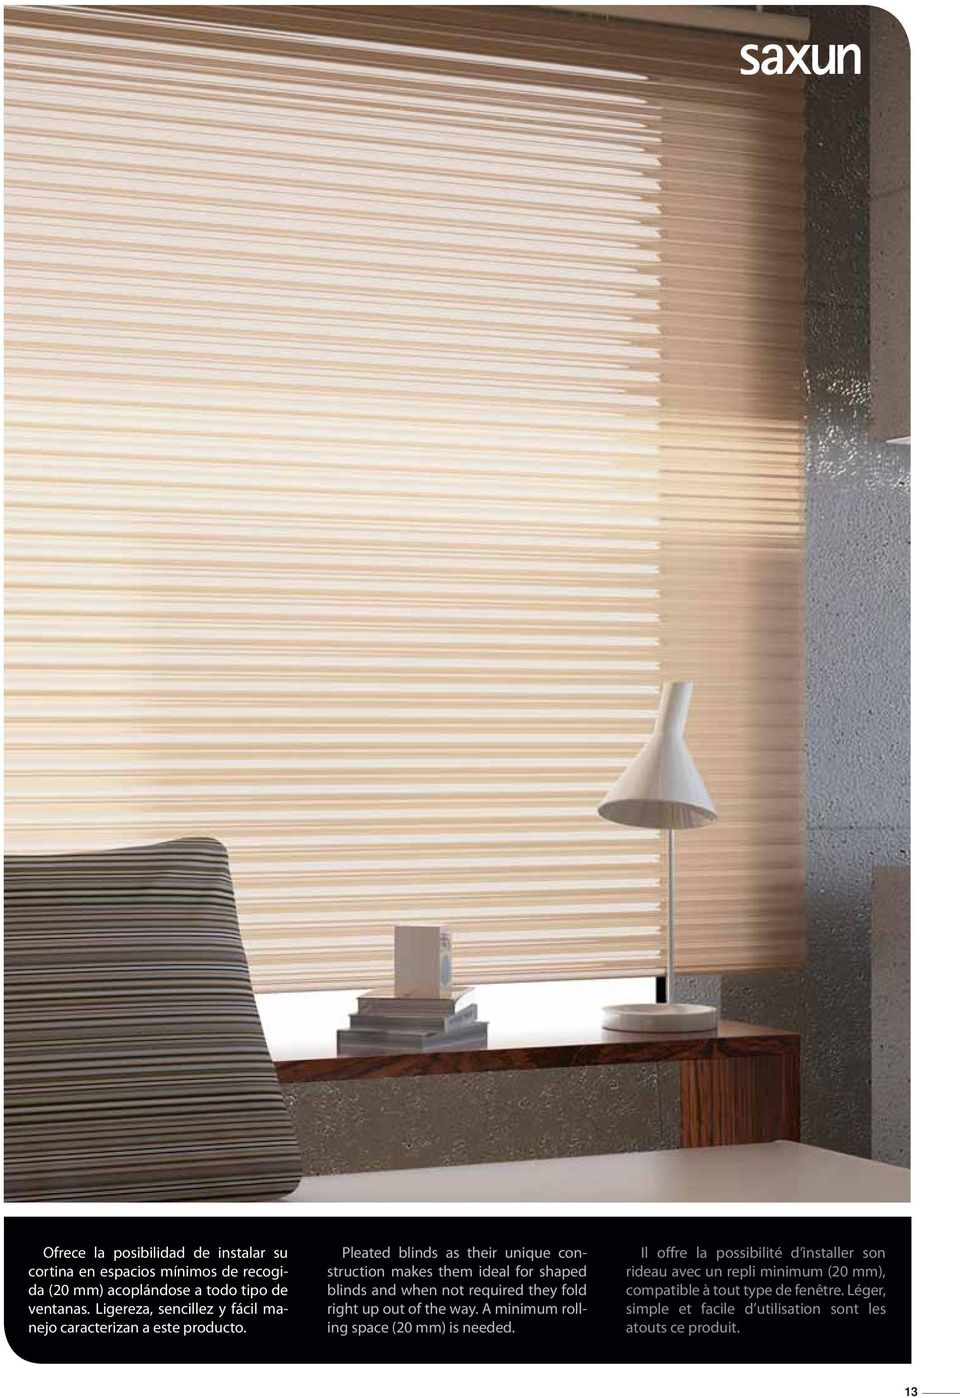 Pleated blinds as their unique construction makes them ideal for shaped blinds and when not required they fold right up out of the way.